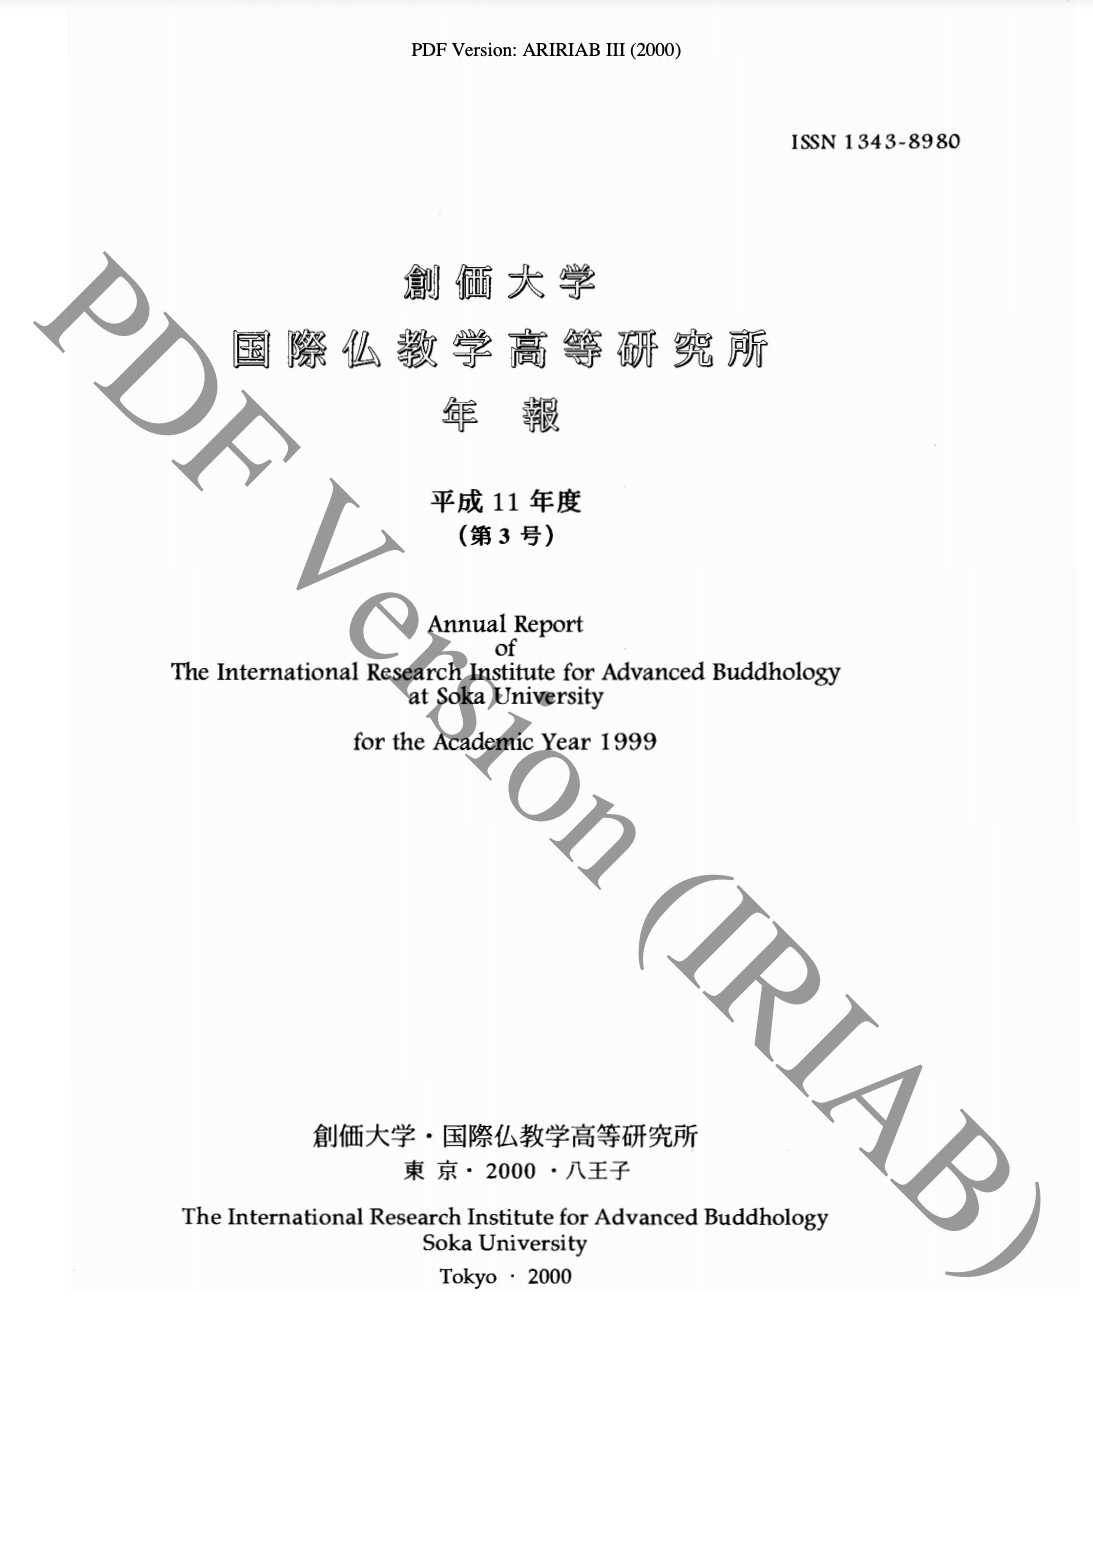 Annual Report of the International Research Institute for Advanced Buddhology at Soka University for the Academic Year 1999-front.jpg